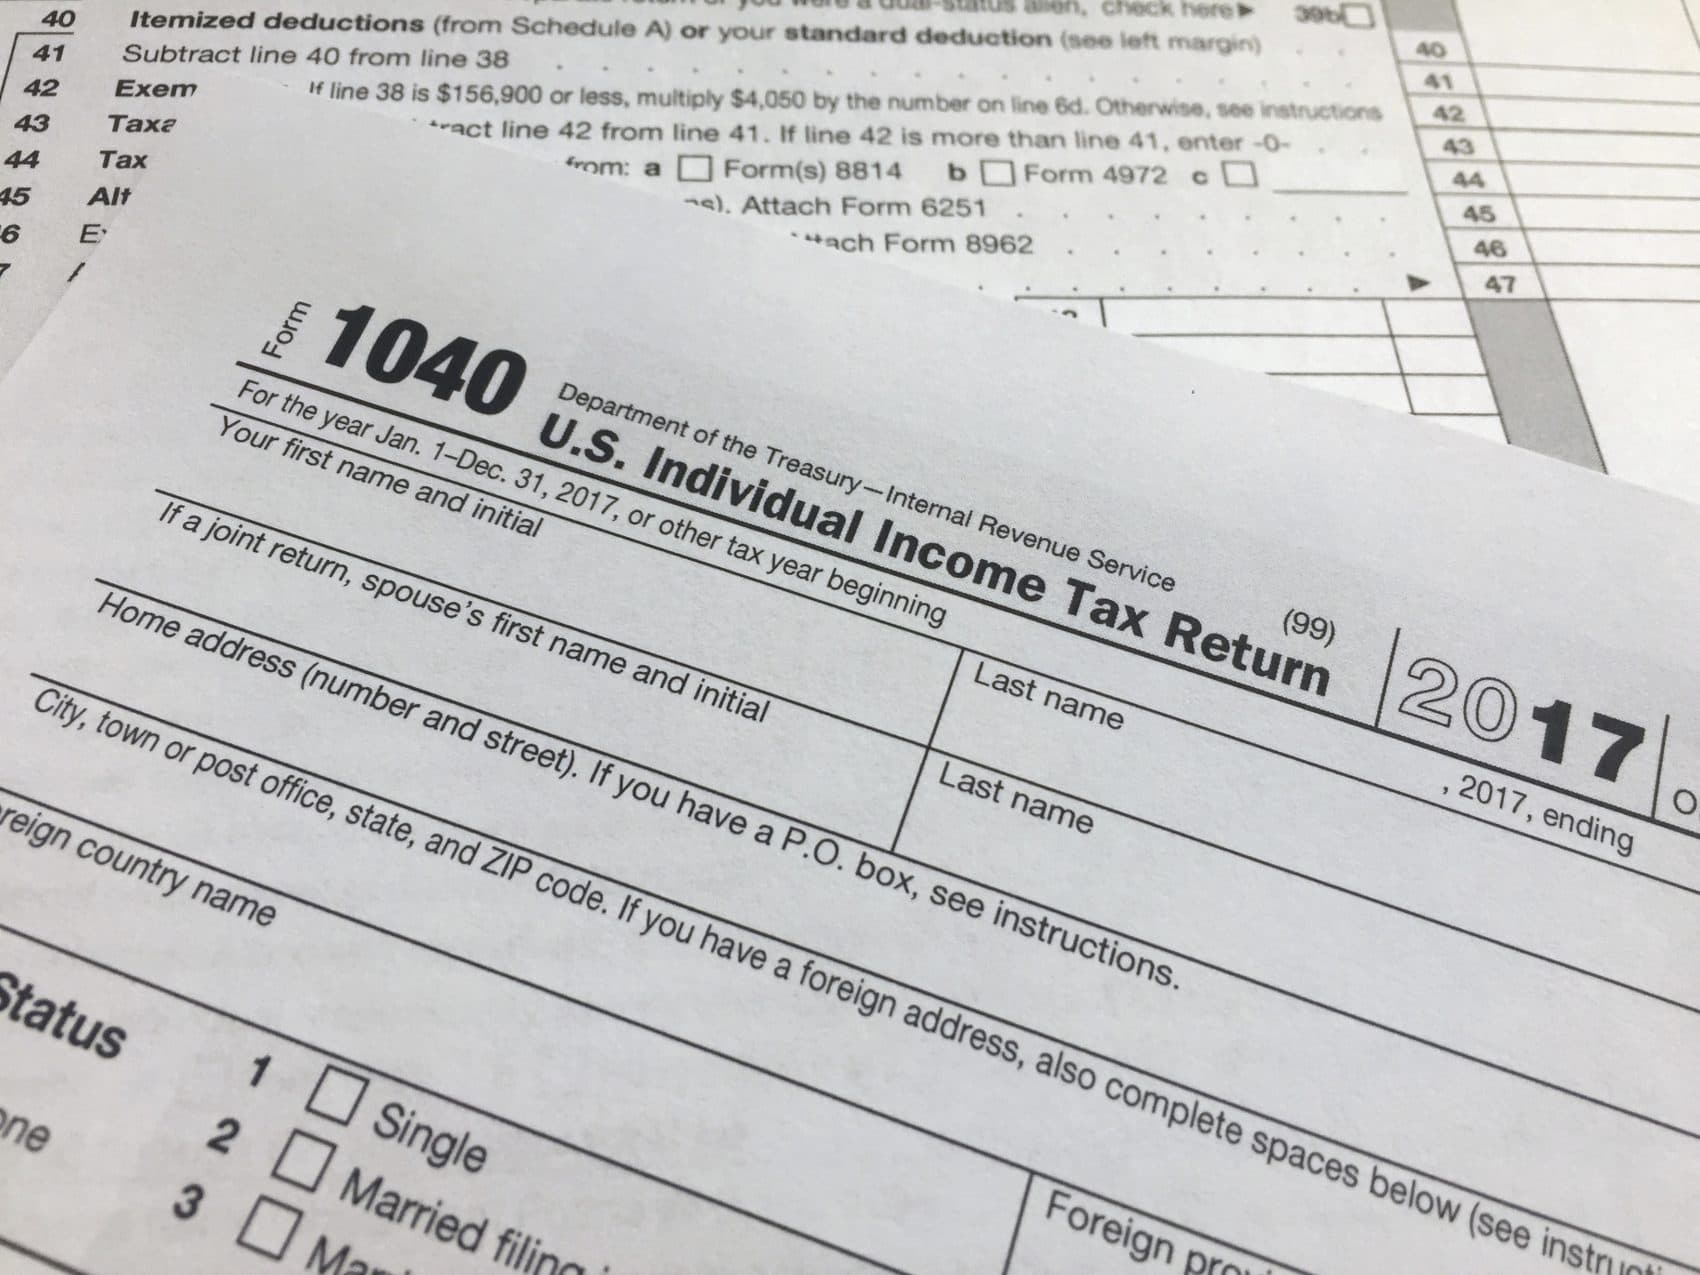 Irs Schedule 2 Instructions 2022 Tax Season Is Right Around The Corner: Here's How You Can Get A Head Start  Before 2022 | Here & Now